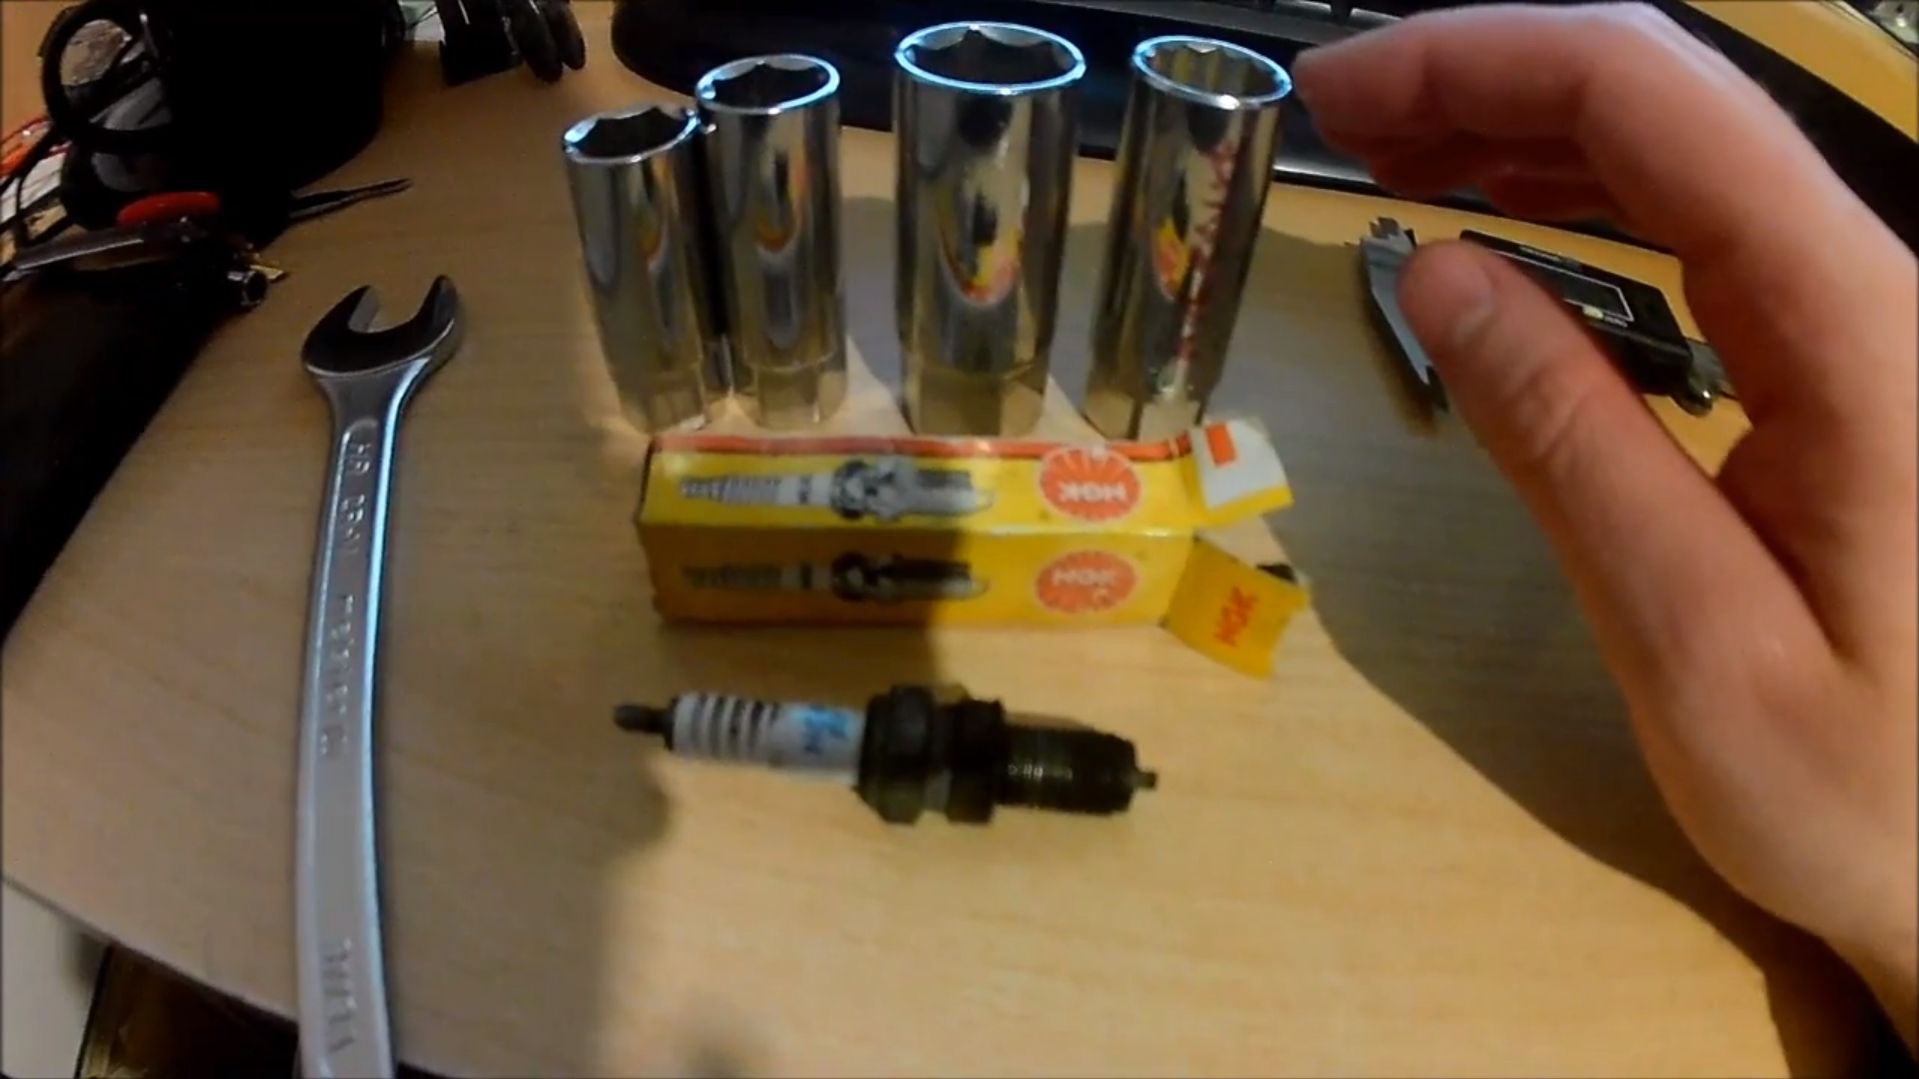 A quick note on spark plugs